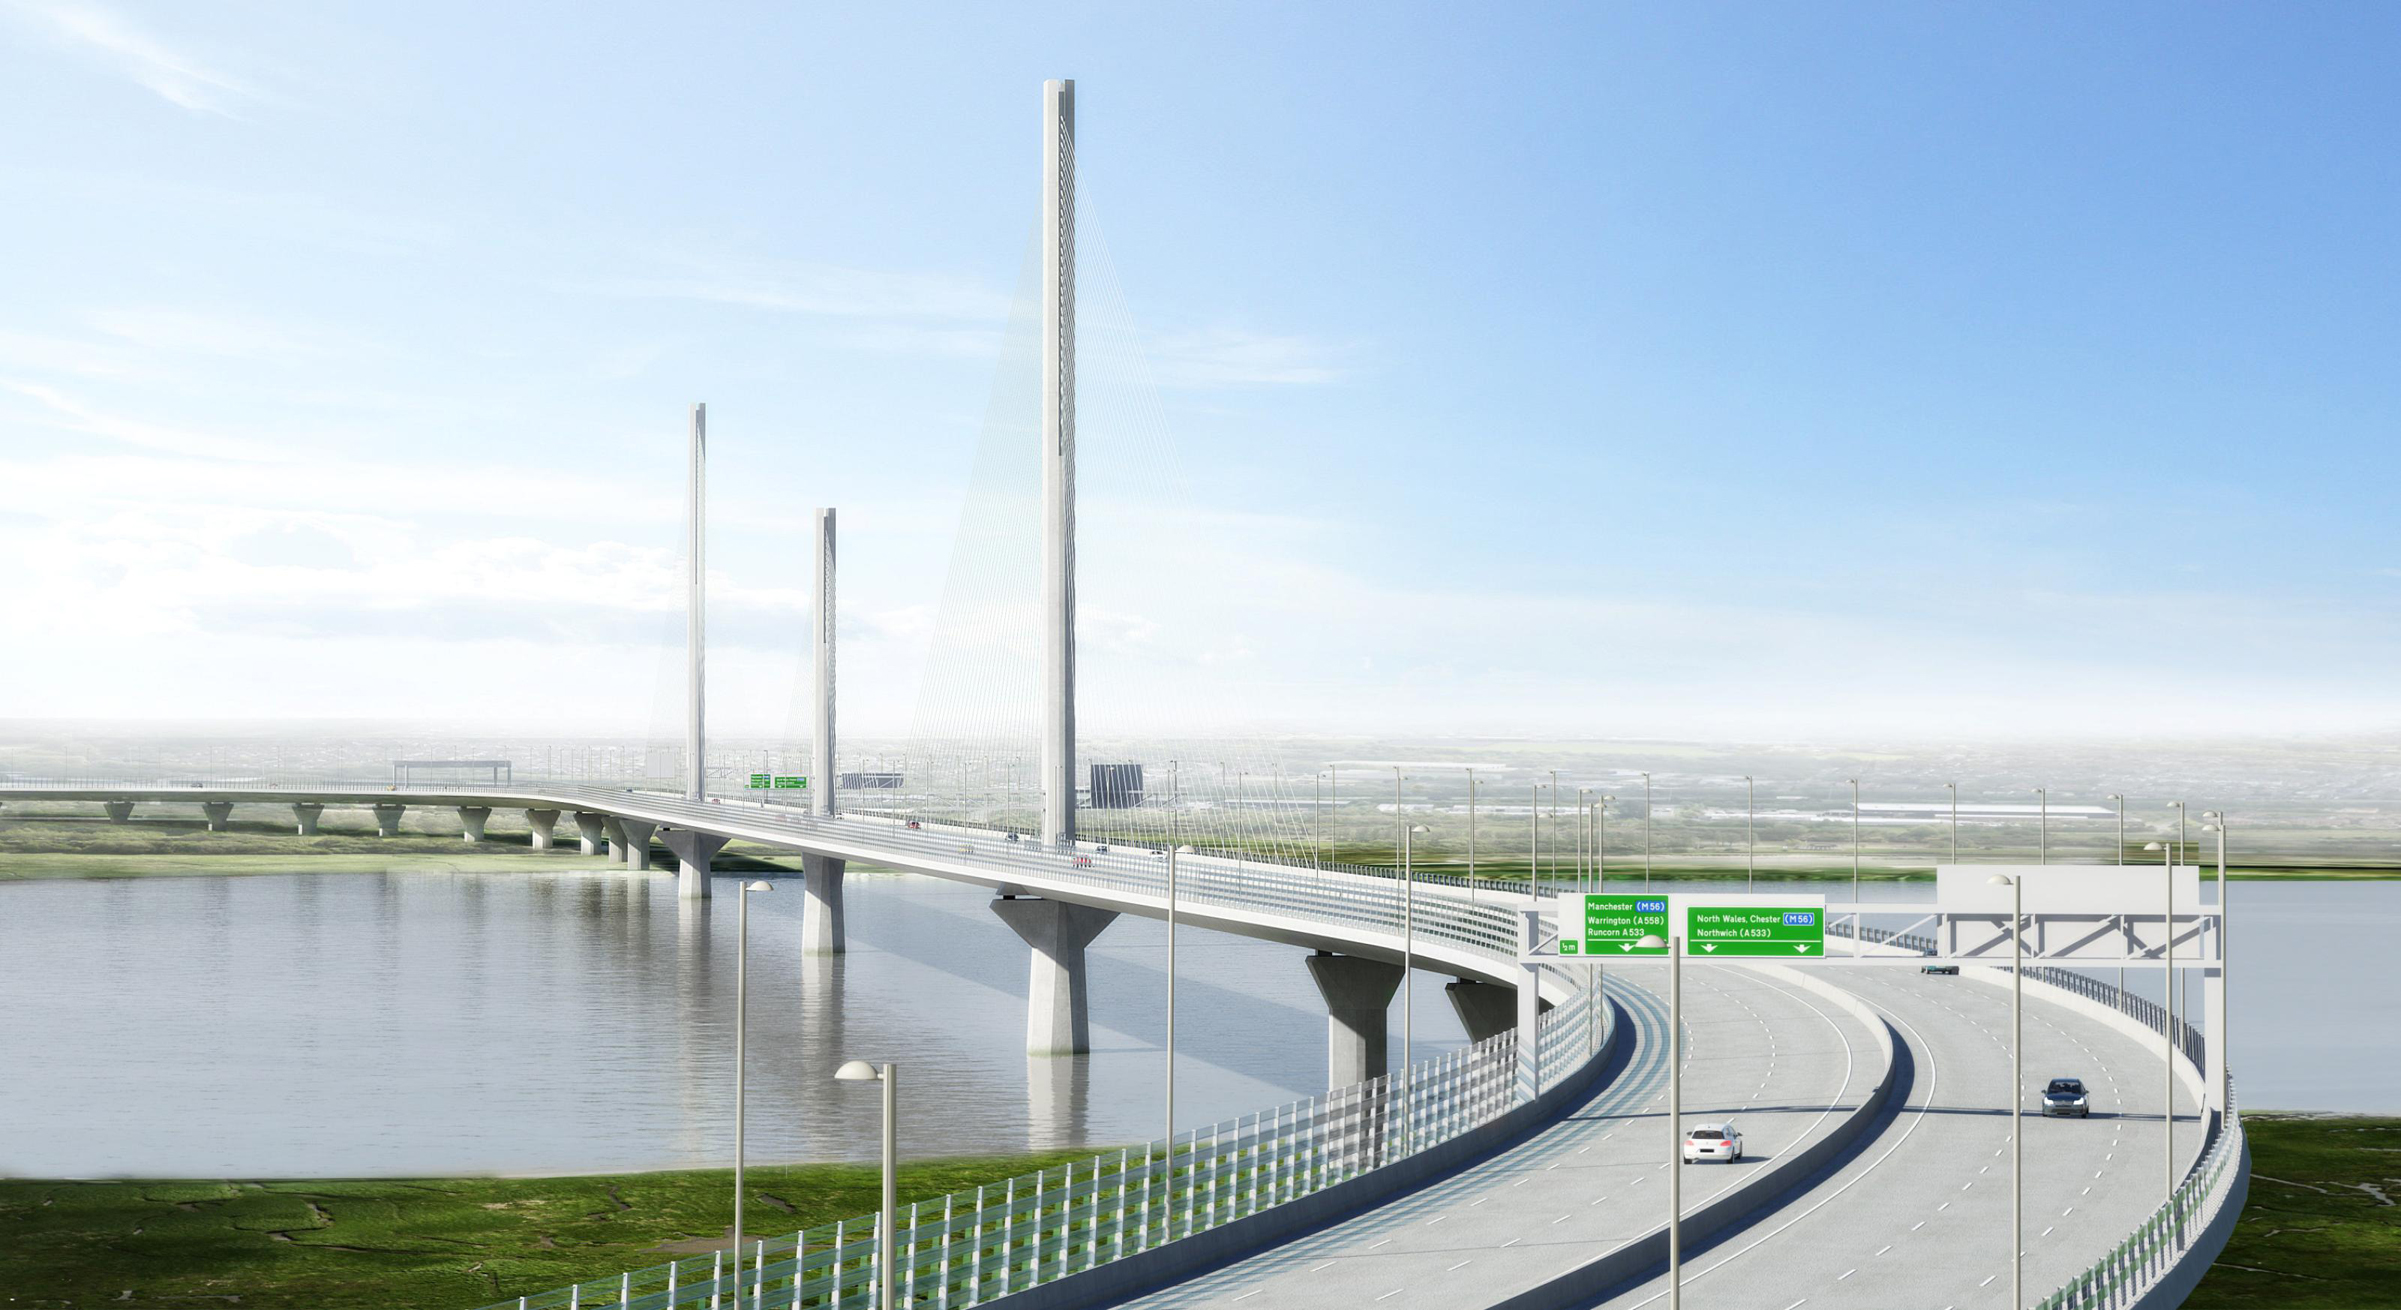 FCC lands 700 million euro Mersey bridge contract, its largest project in the UK